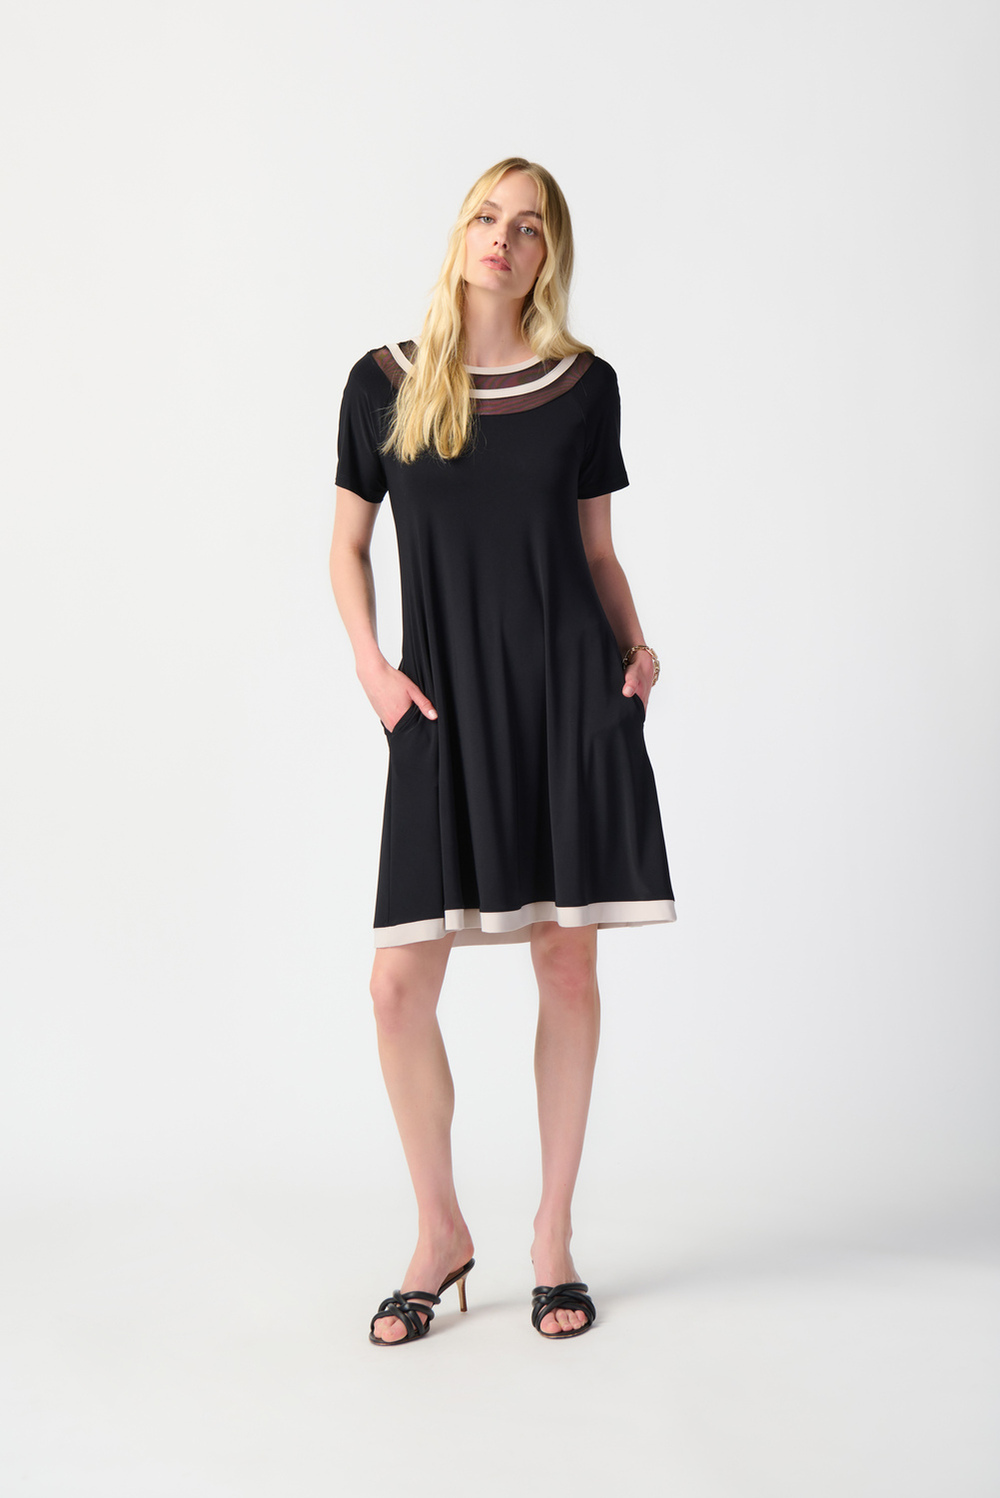 Two-Tone Dress with Pockets Style 241051. Black/moonstone